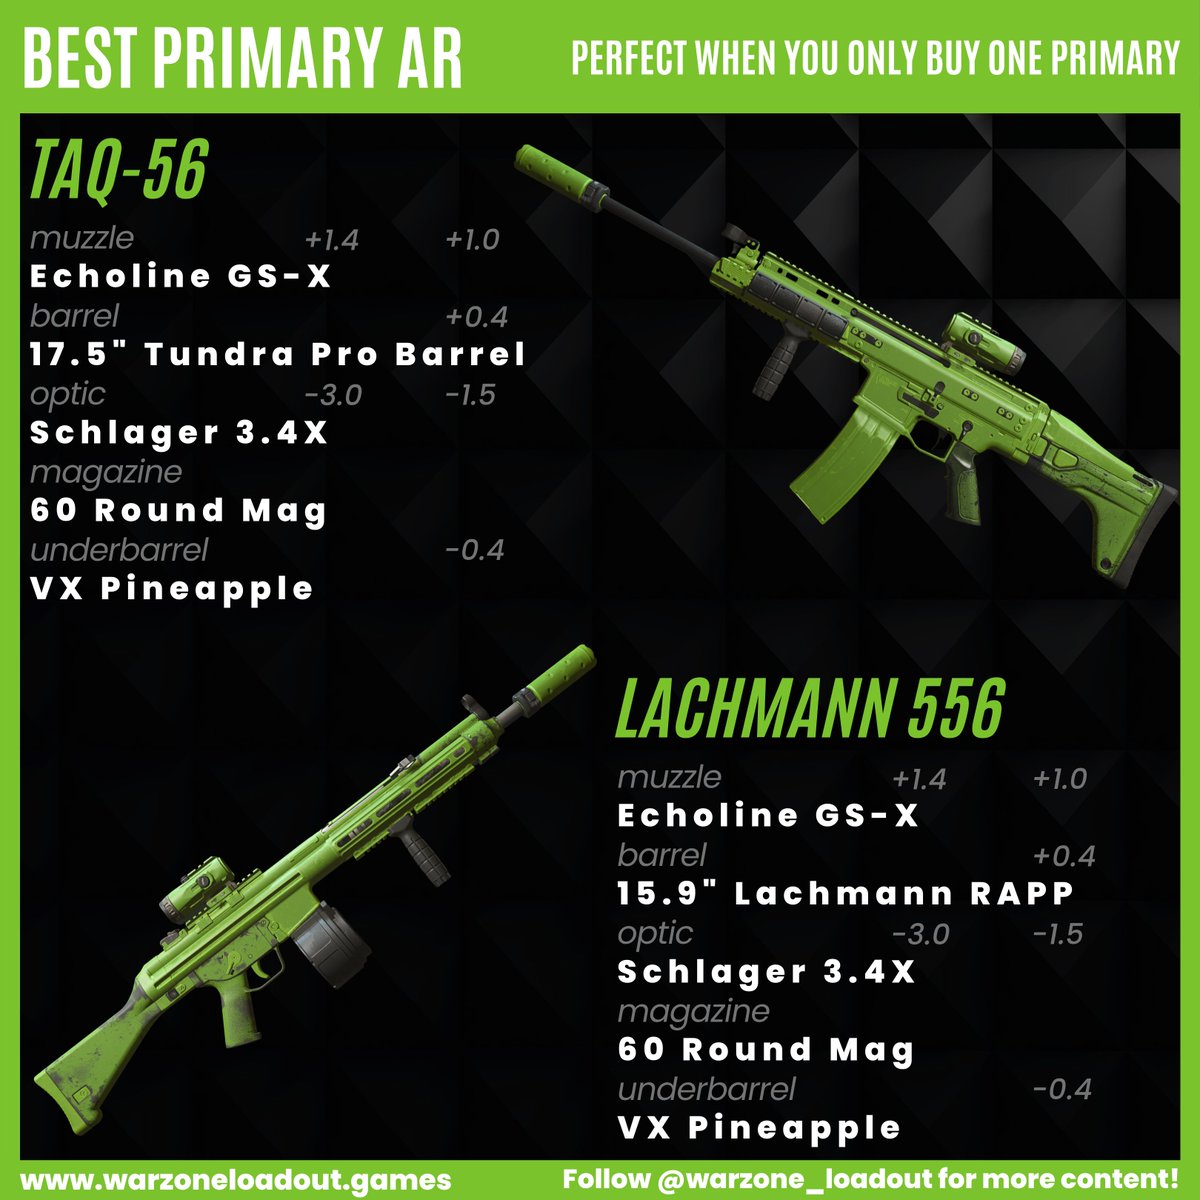 🔫 Best primary AR 🔫 In Warzone 2.0 you will most of the time buy only one primary weapon from a buy station (Not a full loadout). You need this one gun to be consistent and reliable. The TAQ-56 & Lachmann 556 fit perfectly this criteria. #Warzone2 #Warzone